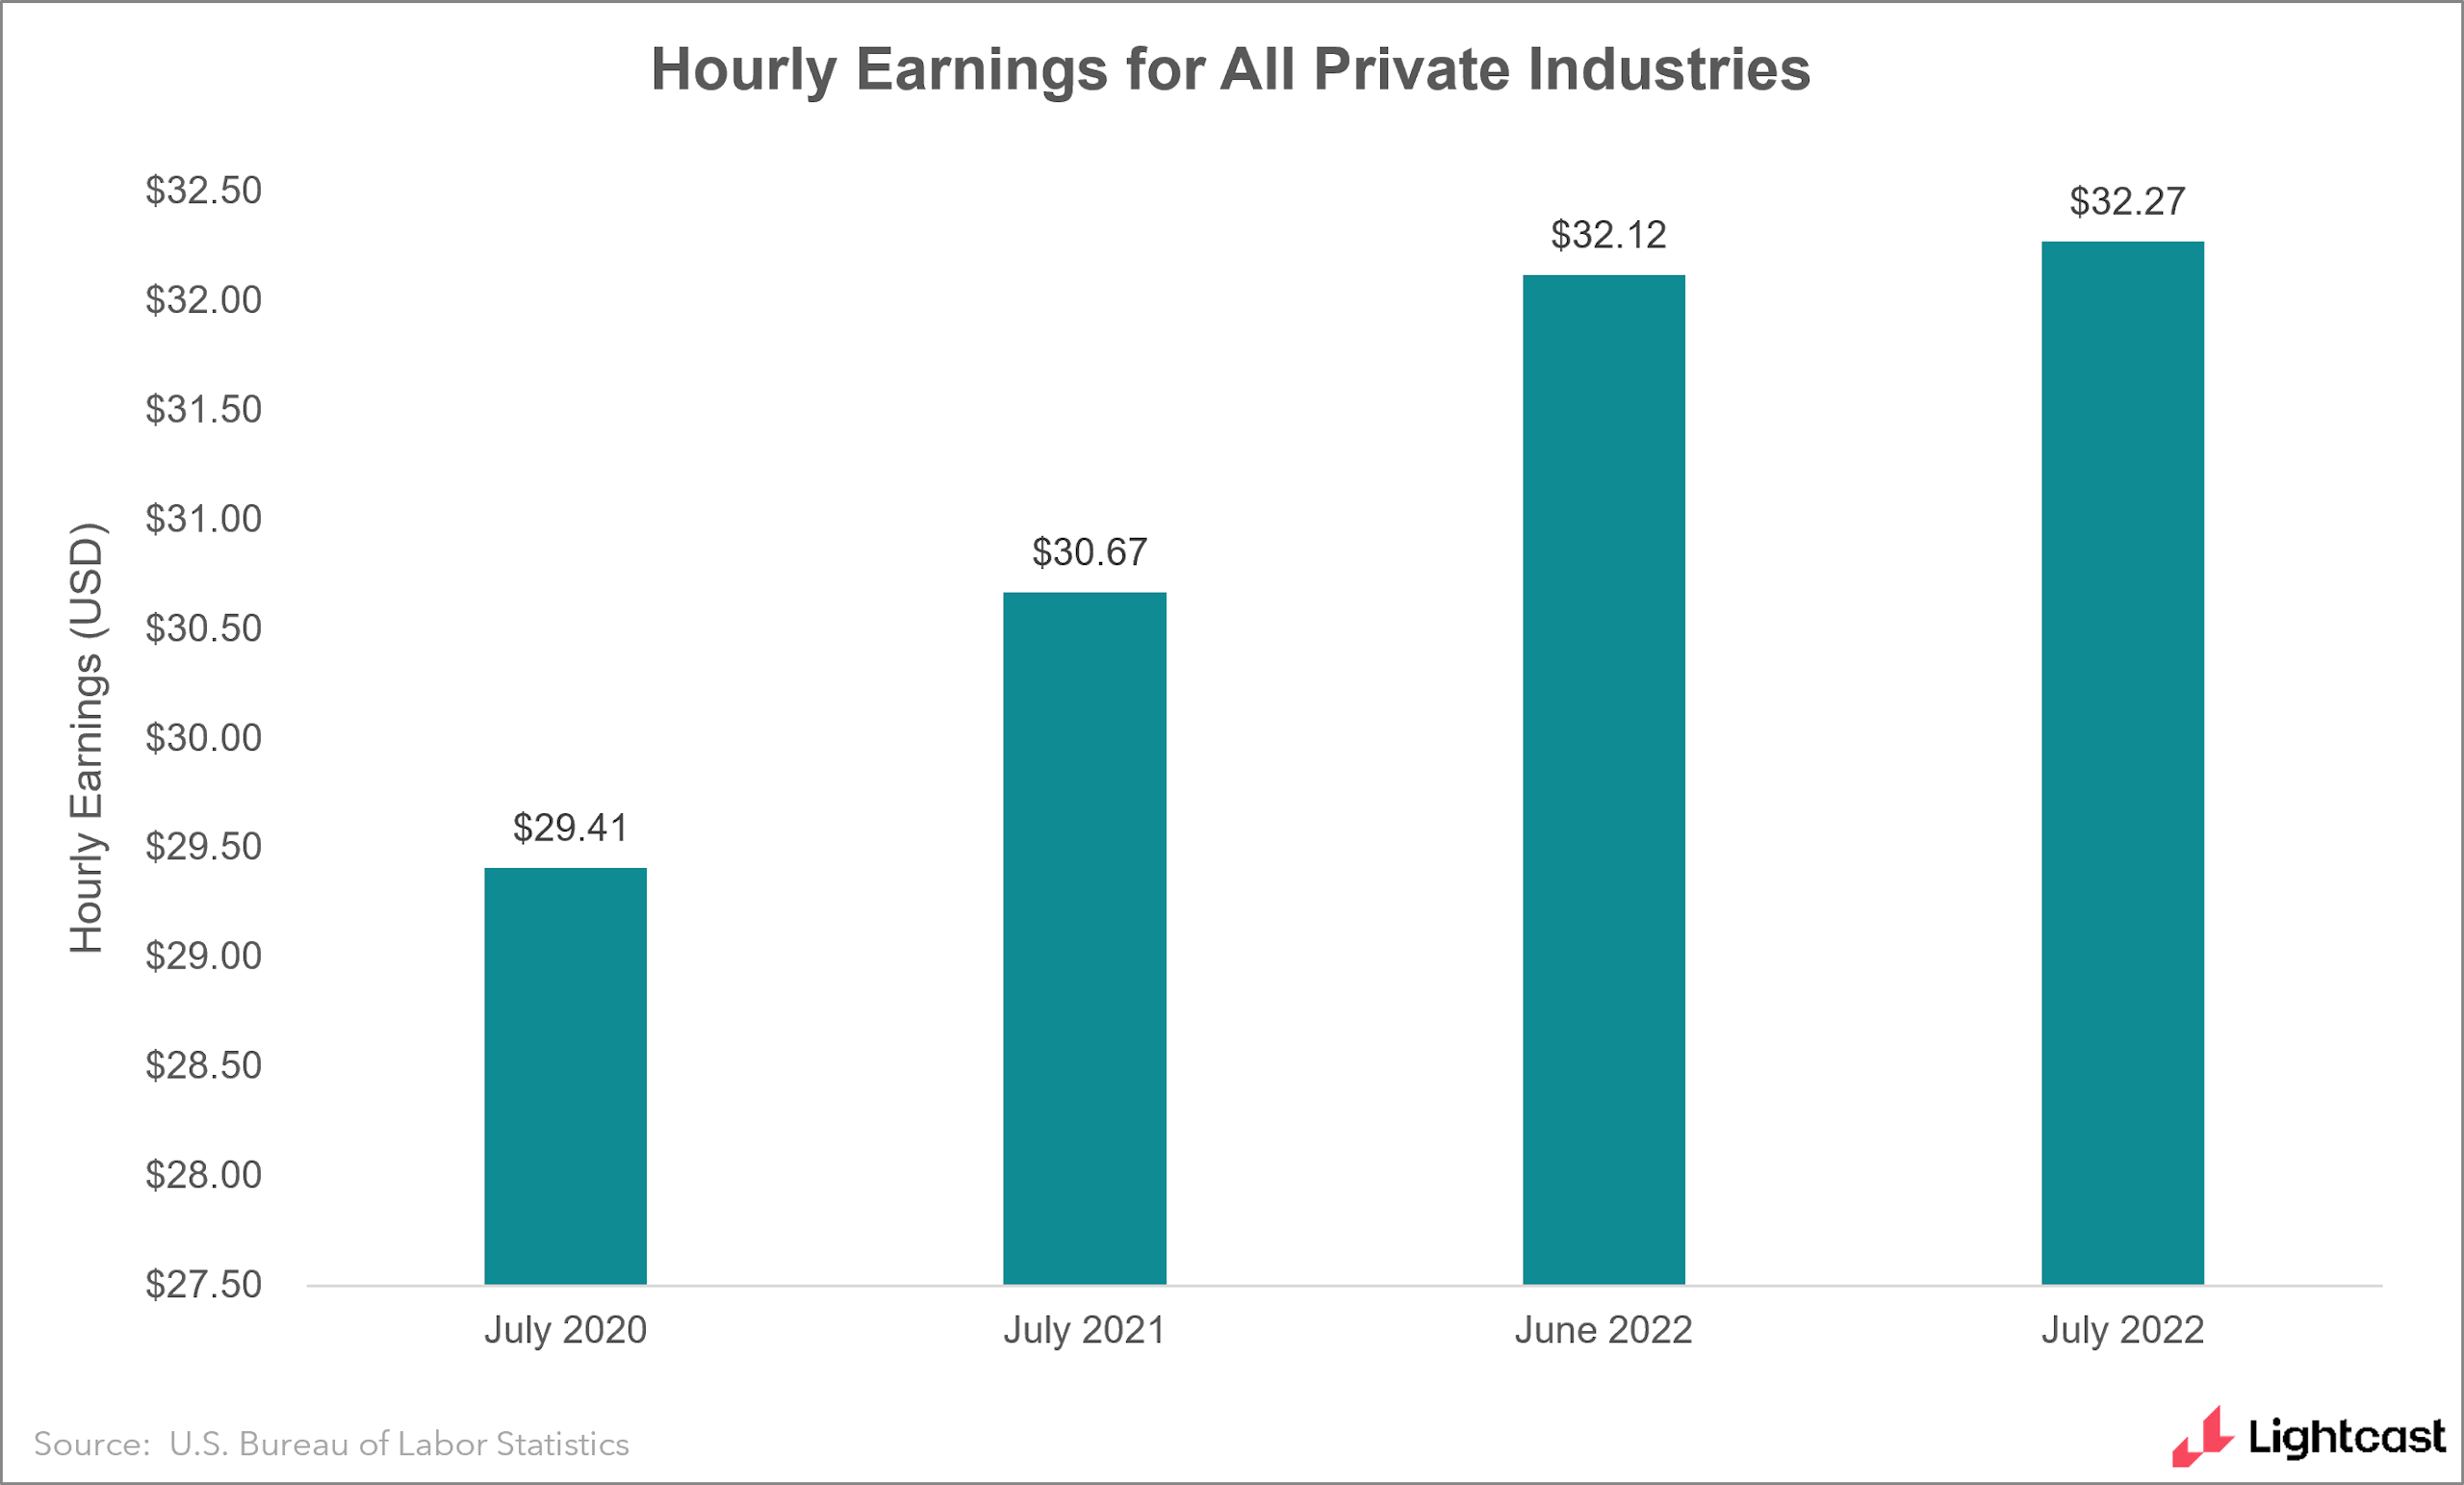 Bar chart showing hourly earnings among all private industries, showing steady increase up to $32.27 in July